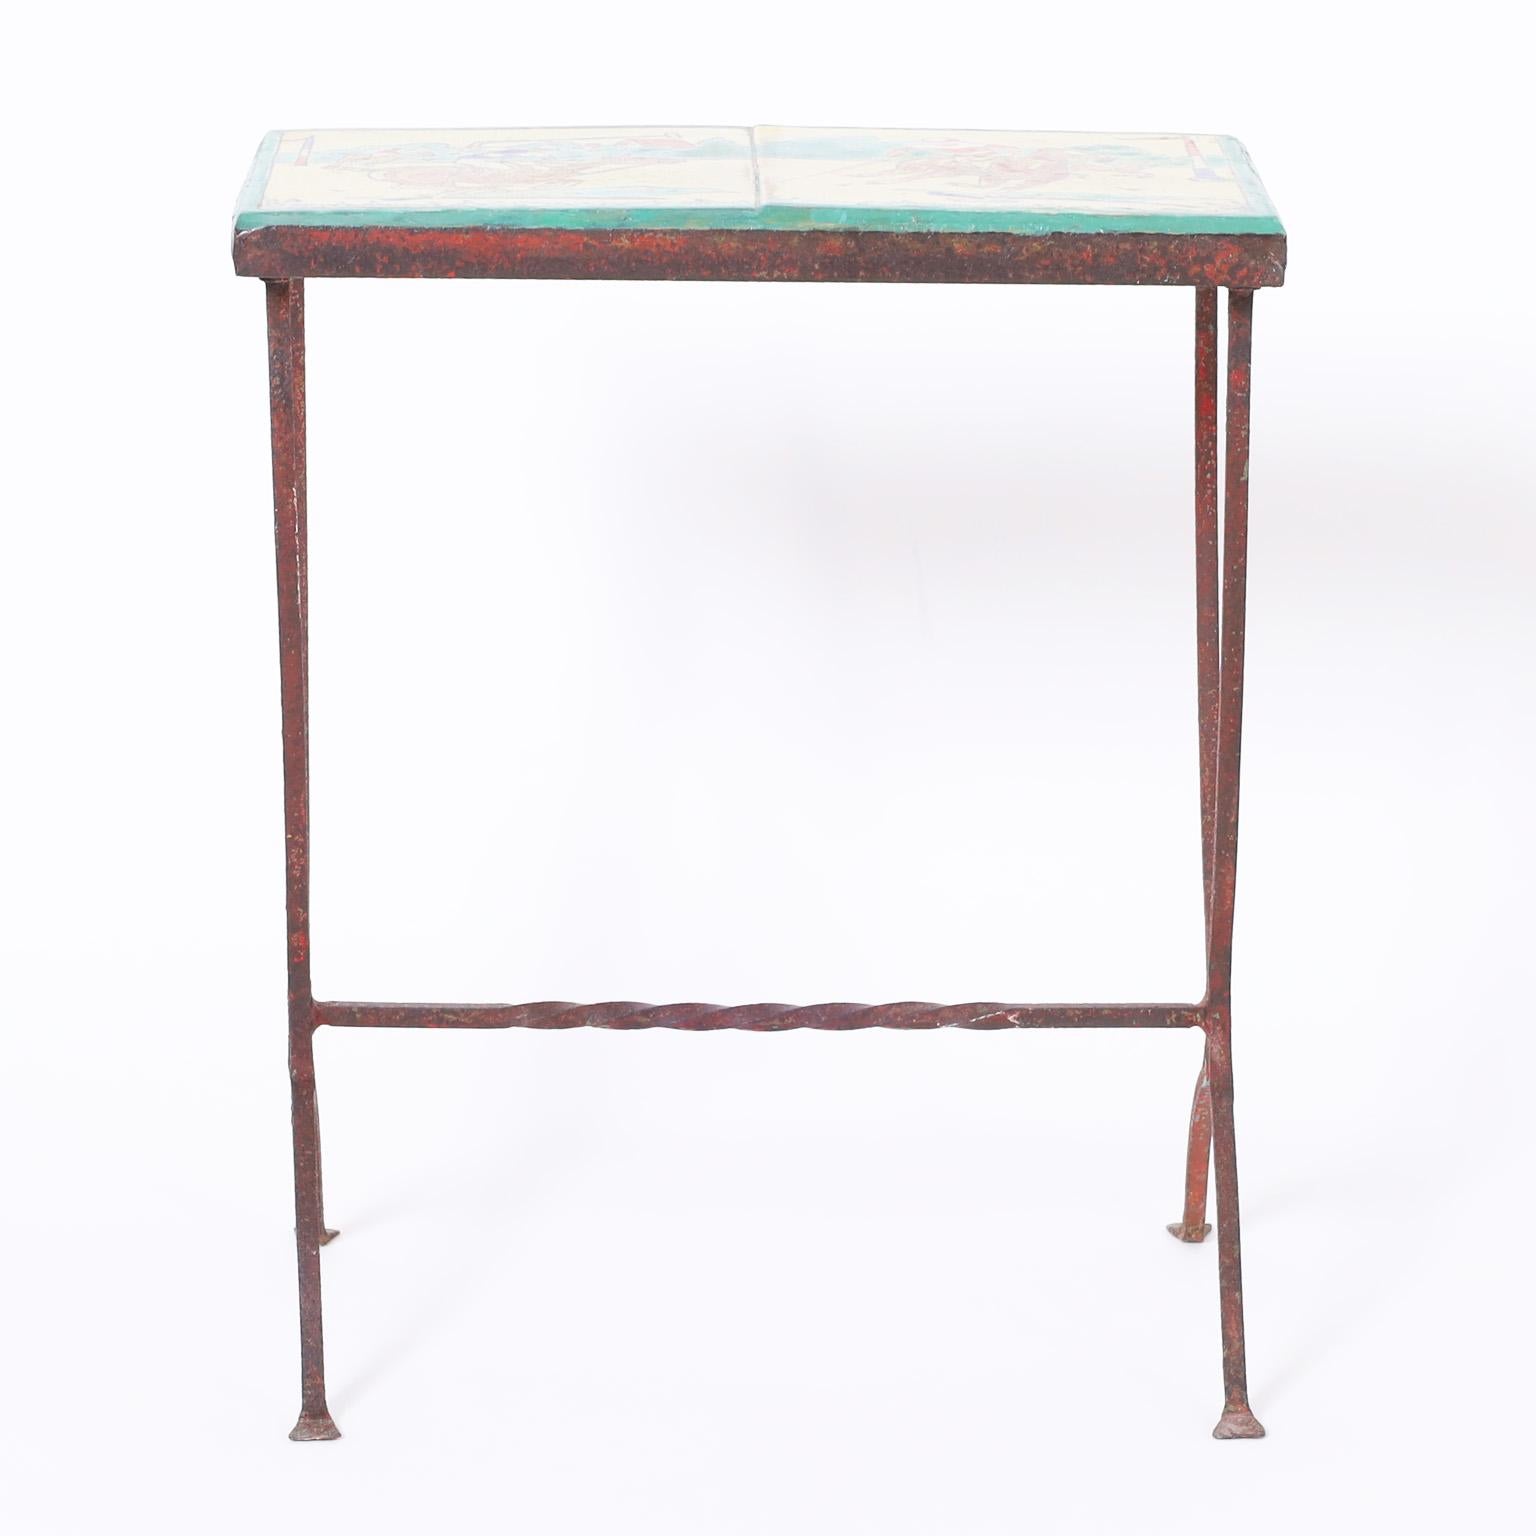 English Antique Iron Table or Stand with a Polo Themed Tile Top For Sale